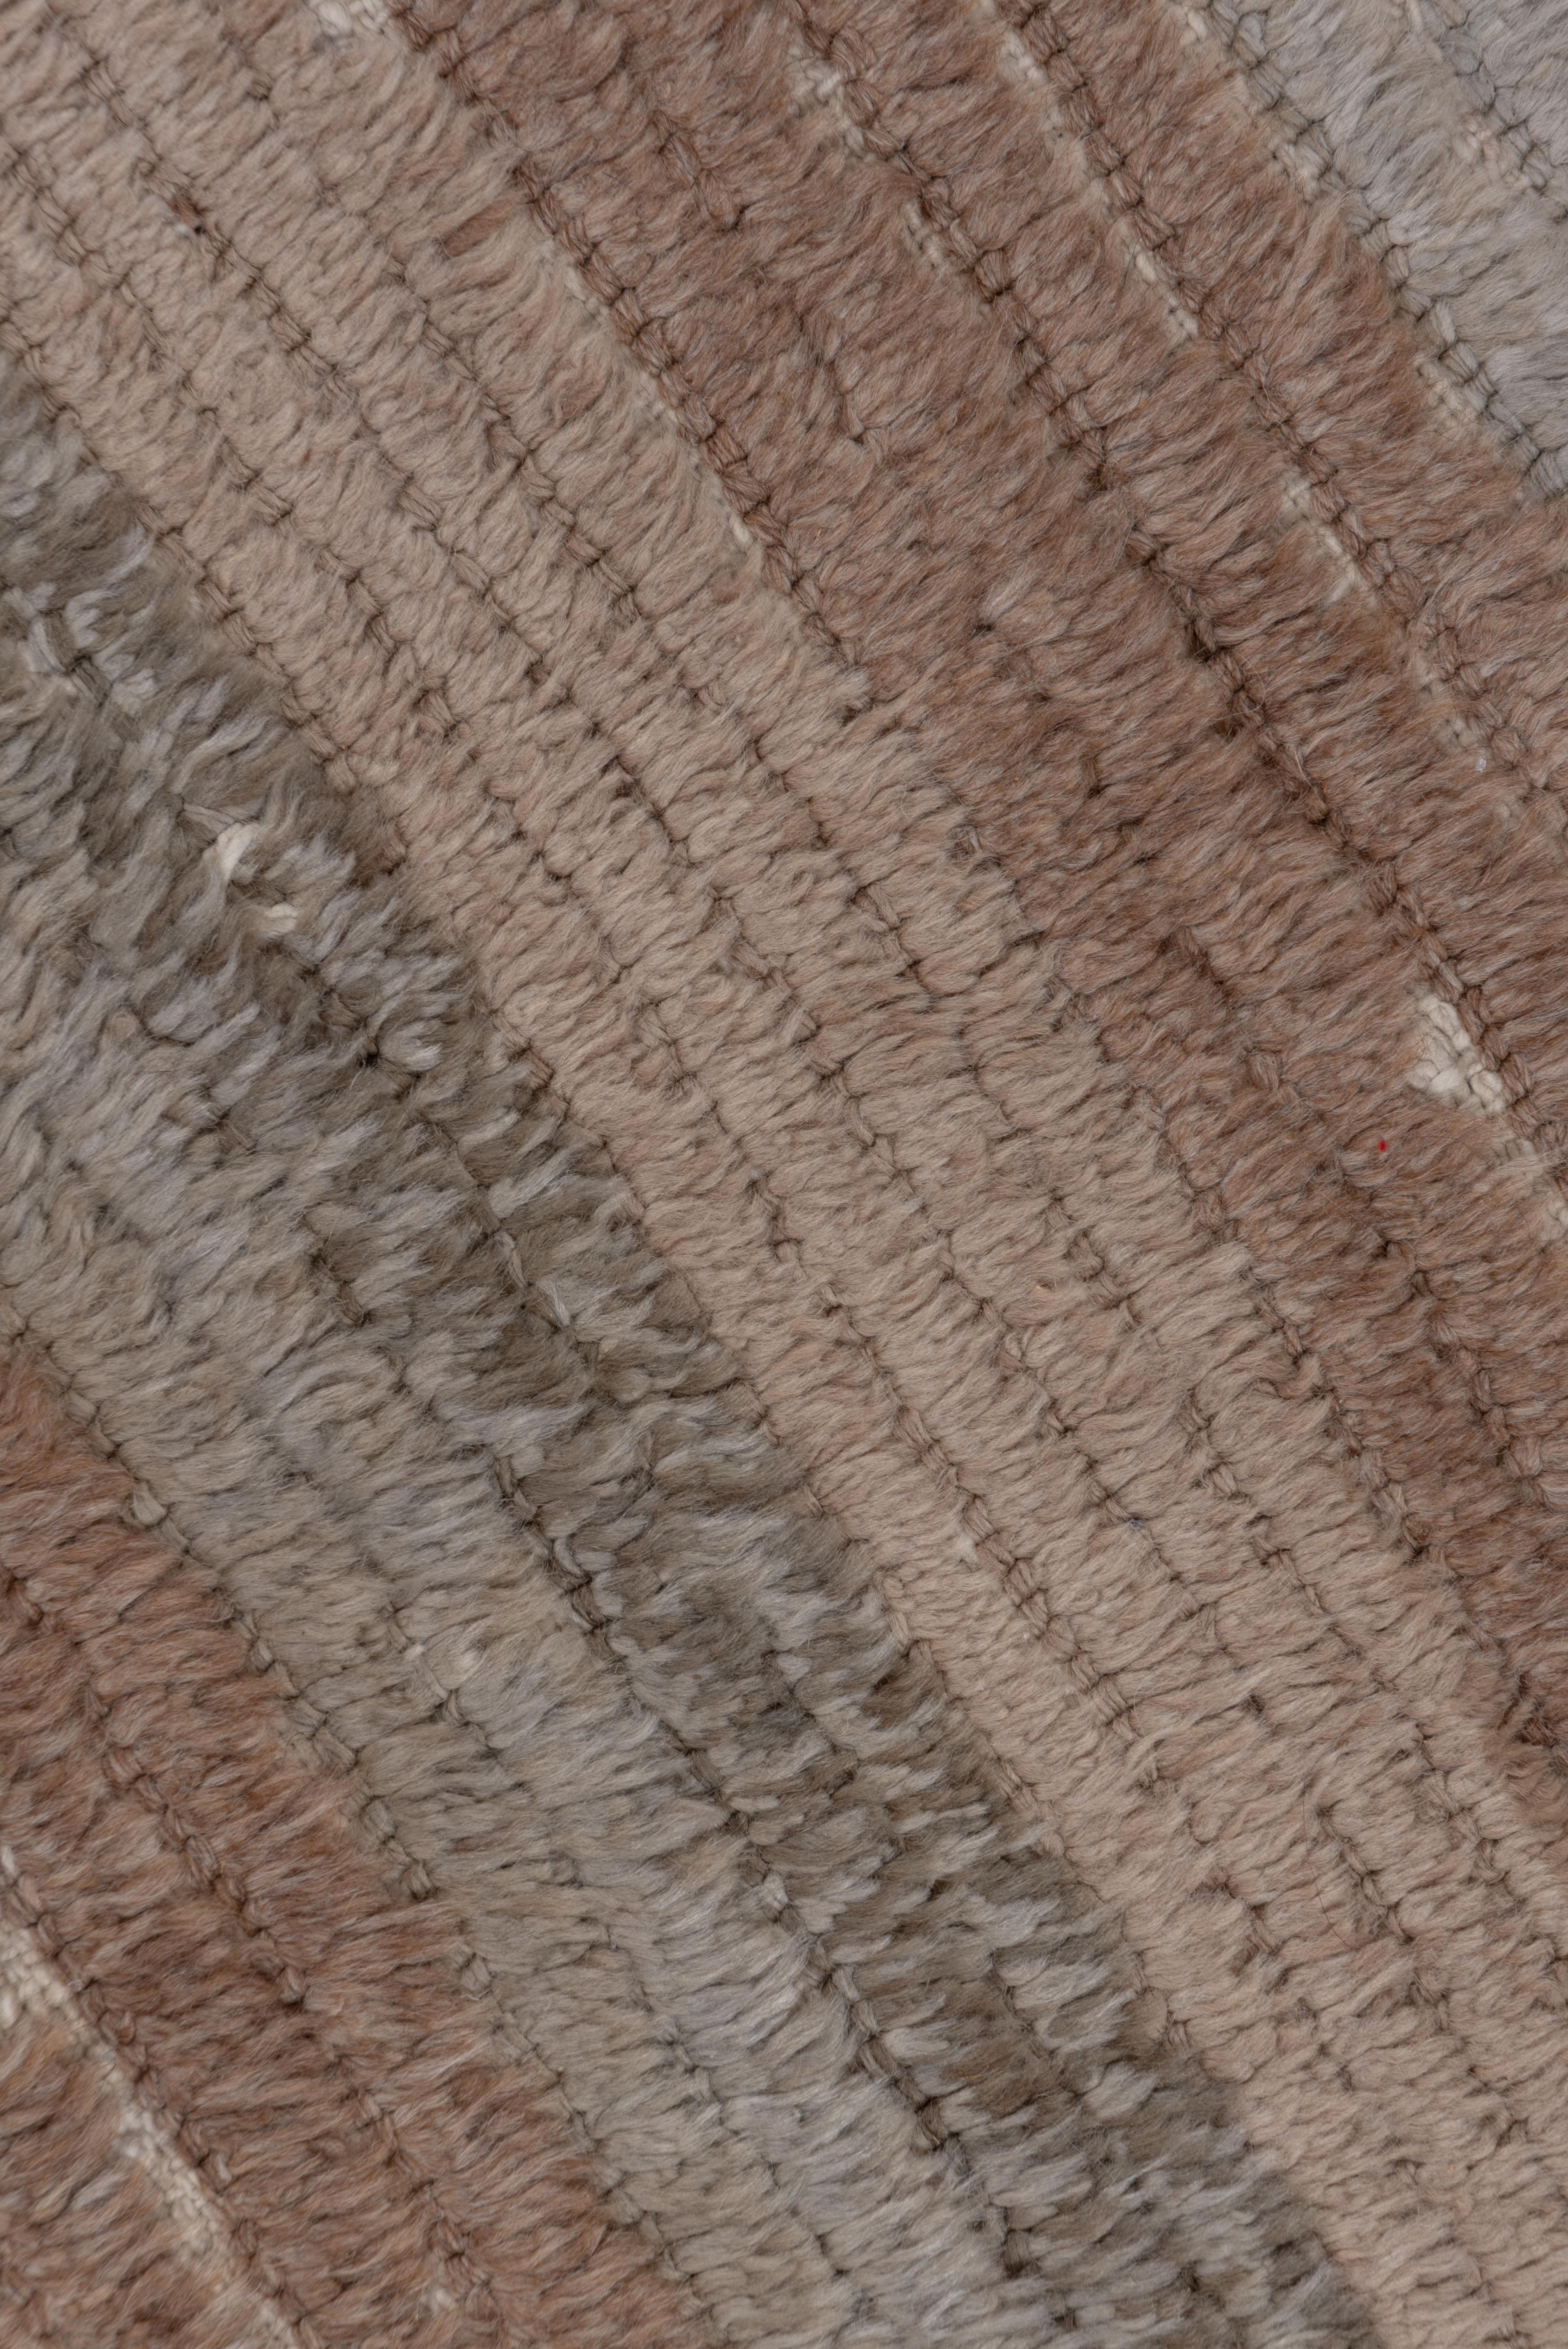 In tones of brown, sand, khaki, tan and beige, this long and flat pile Turkish village scatter shows numerous wefts between knot rows. There are no border and the earth tones run straight across. The condition is very good.